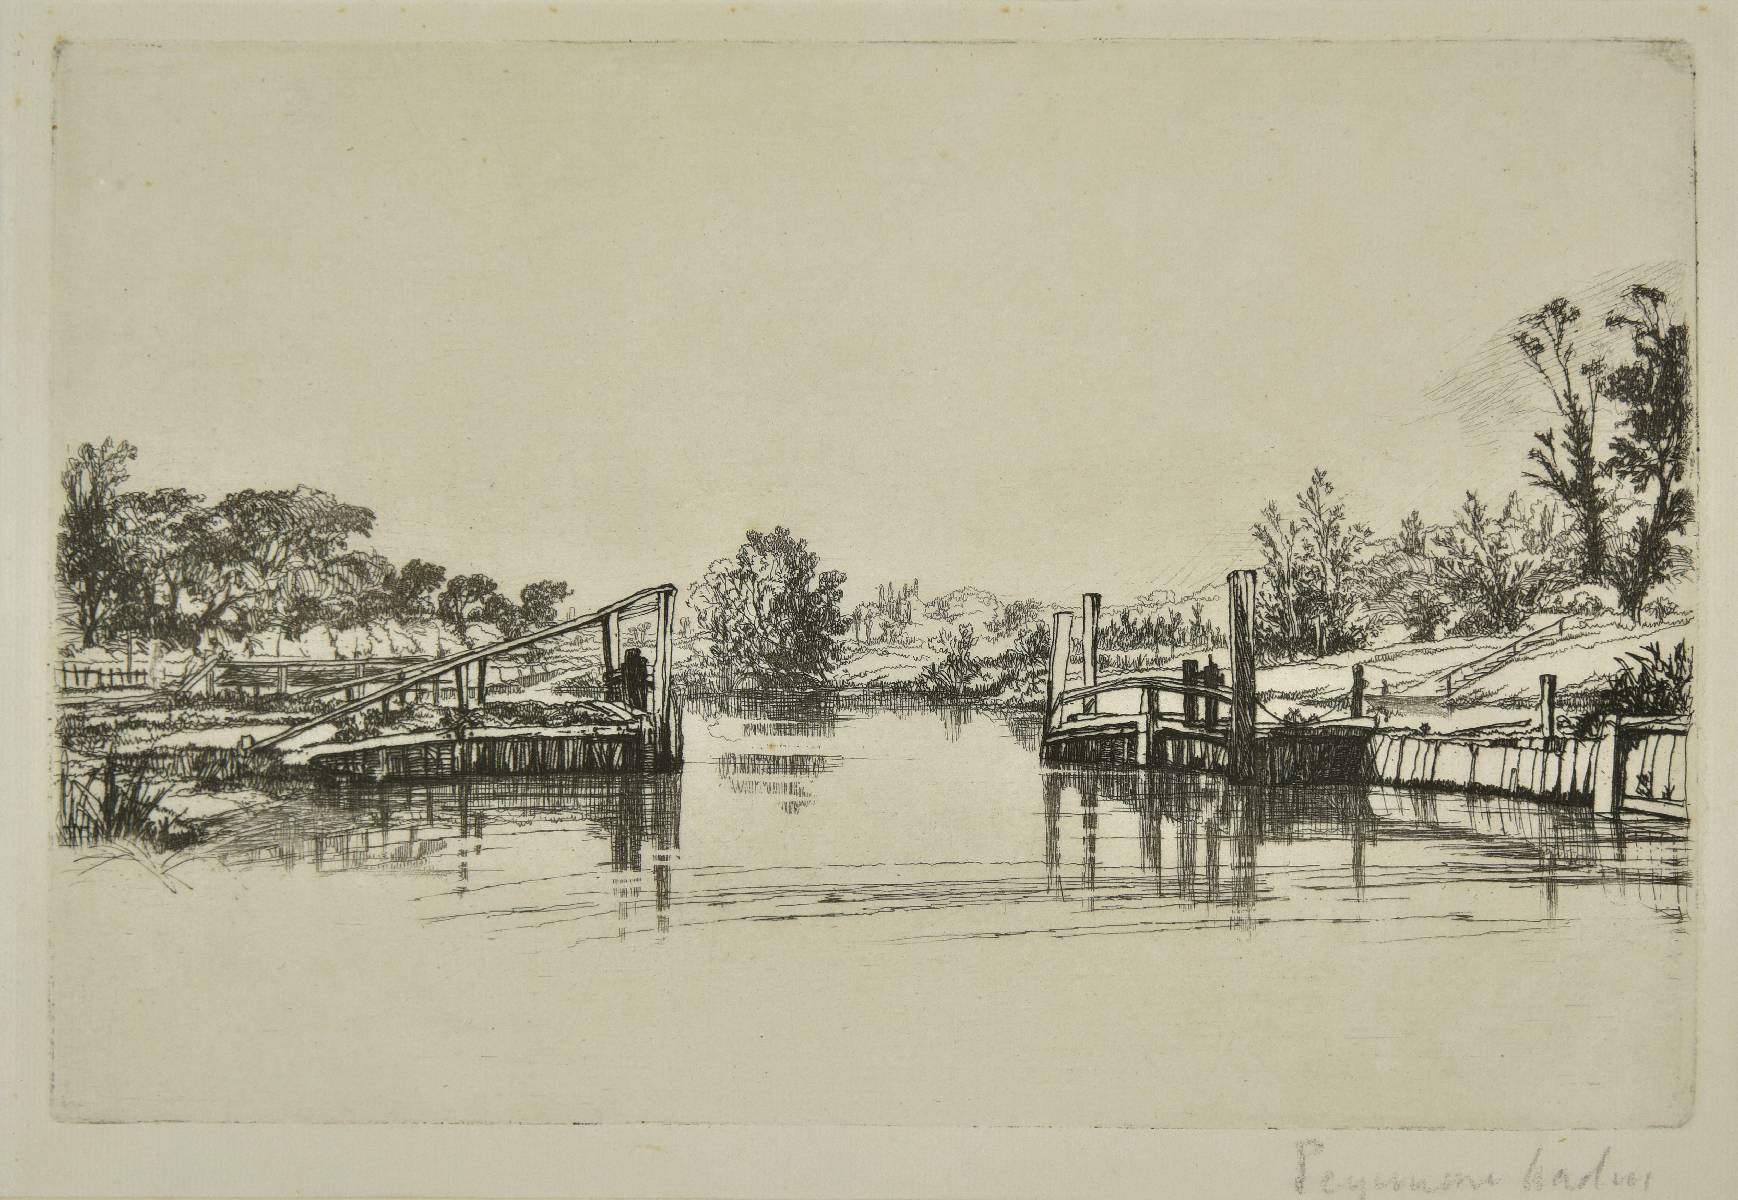 *Haden (Francis Seymour, 1818-1910 ). Egham Lock, 1859, etching on laid paper, with light plate